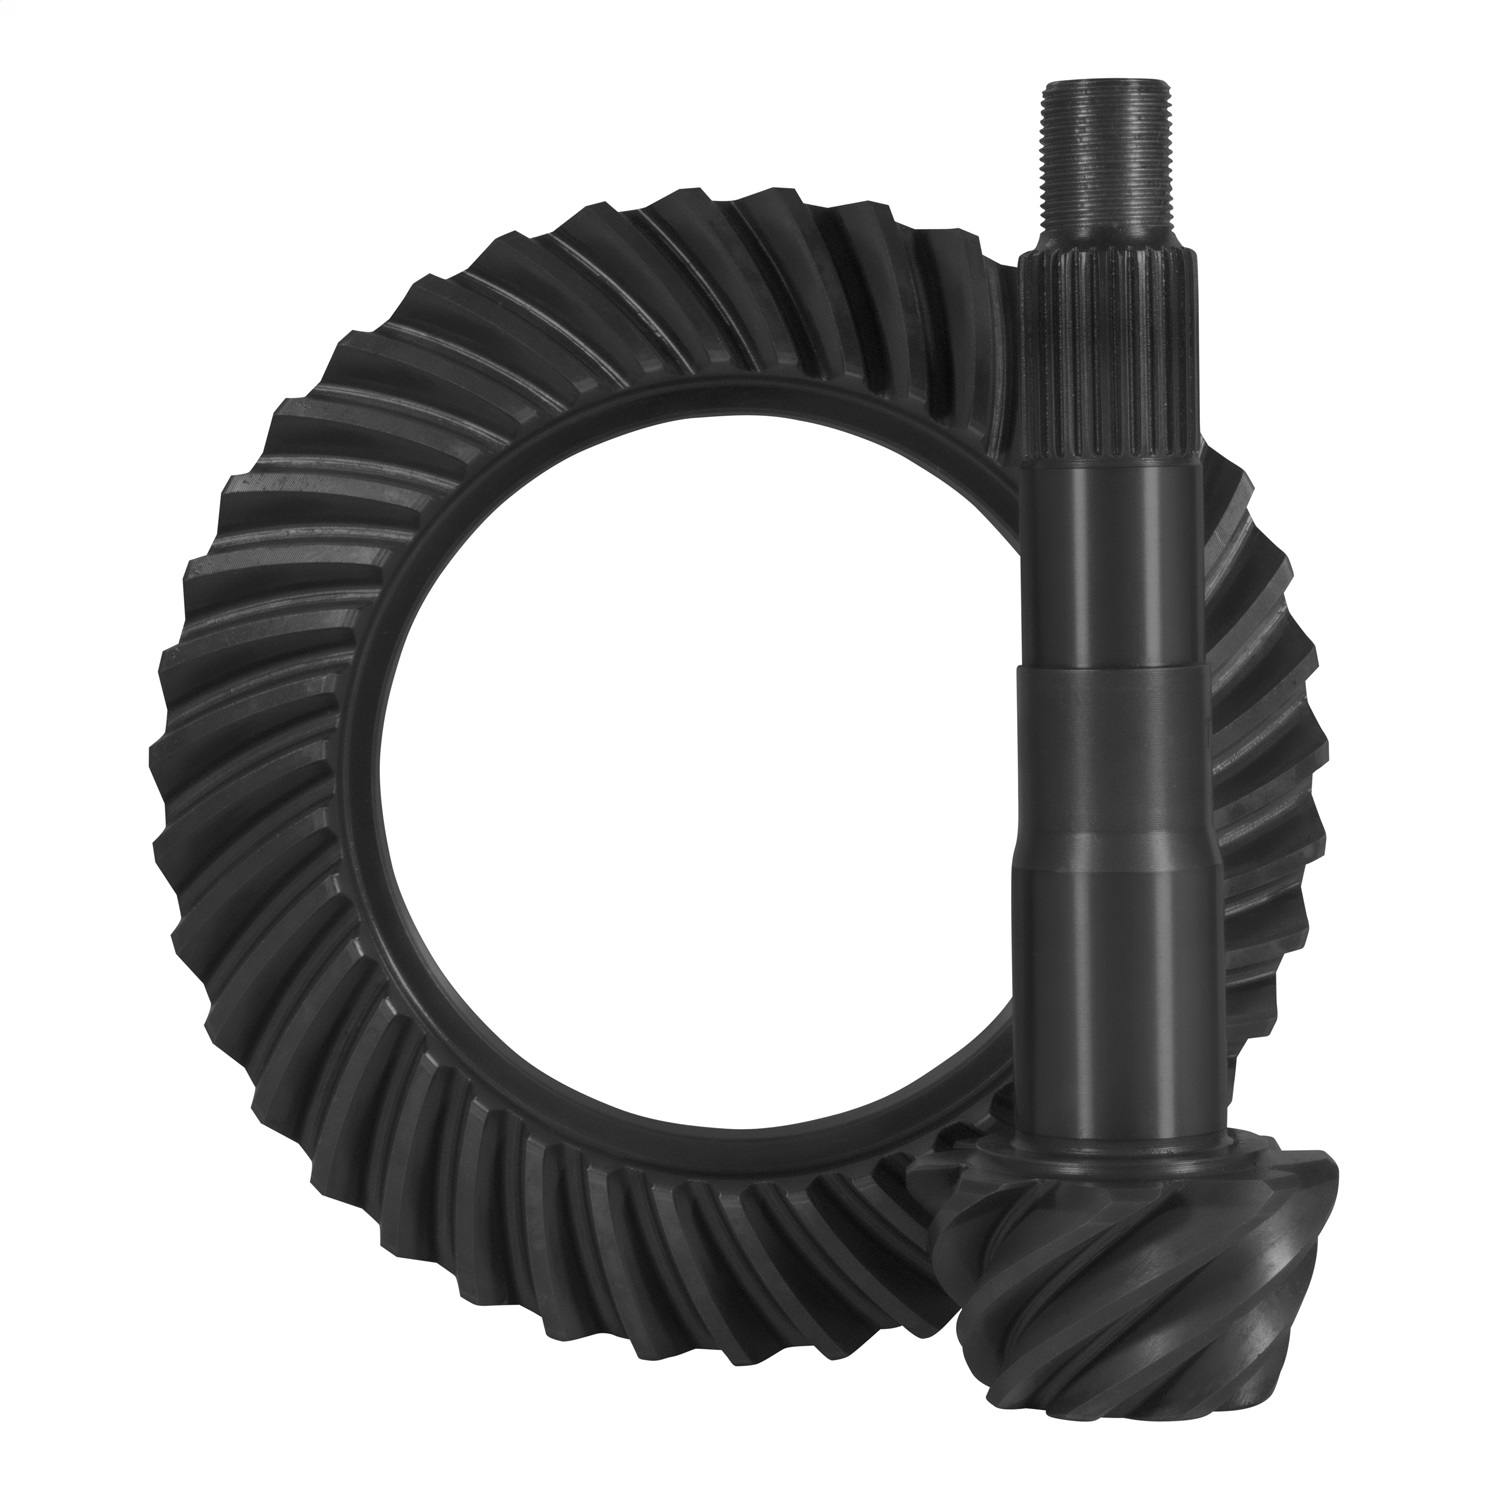 USA Standard Gear ZG TLCF-456R-29 Differential Ring and Pinion